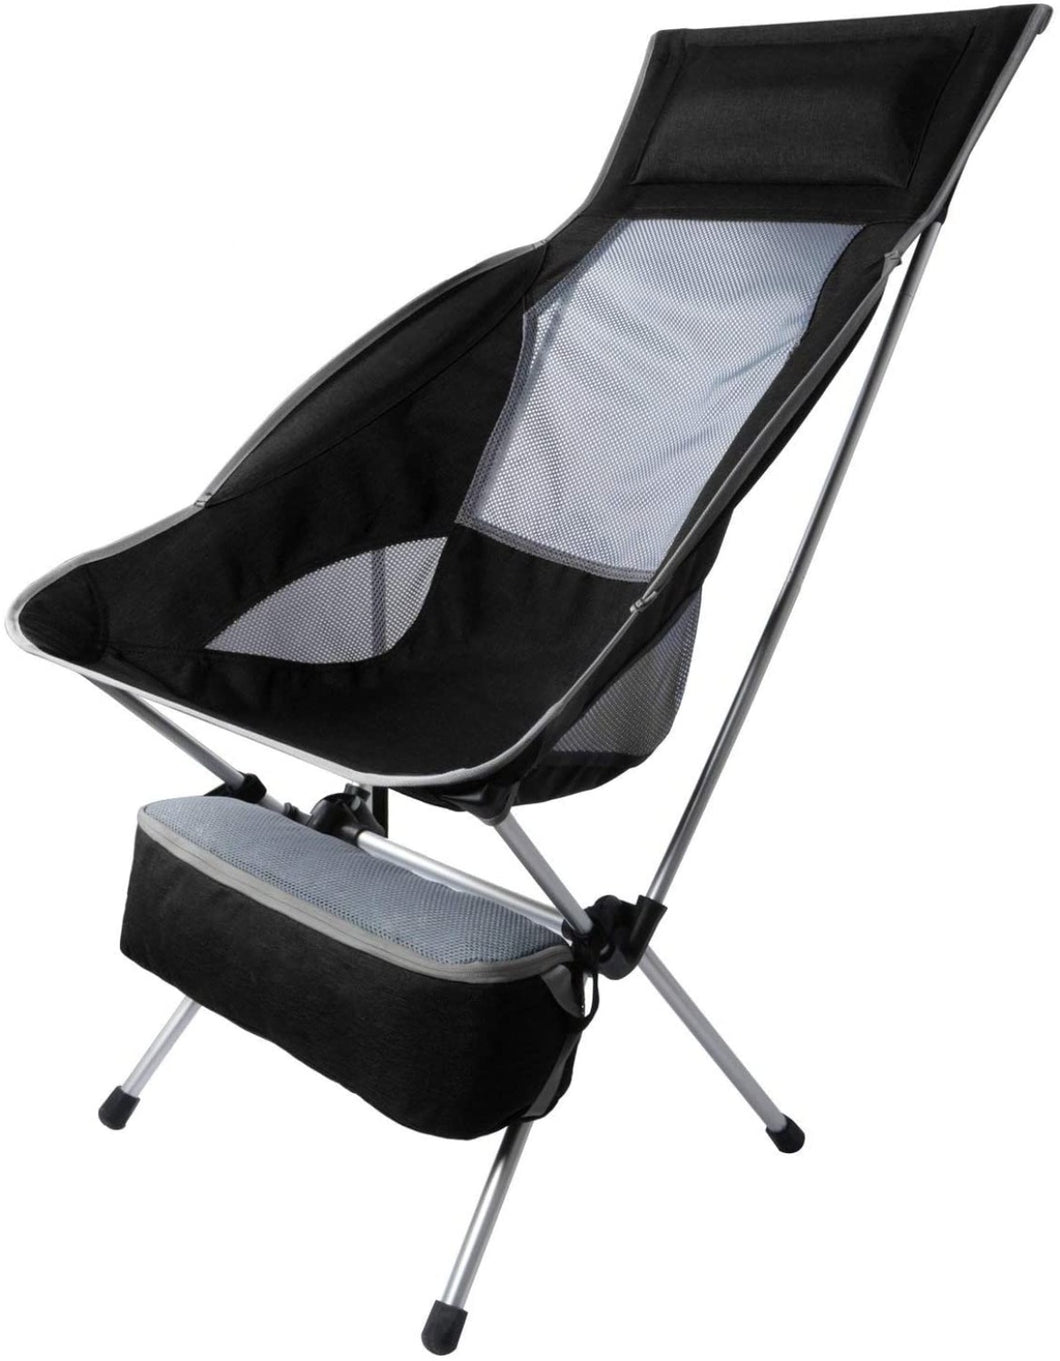 Outdoor chair [1000D fabric / waterproof] Load capacity 100KG // Load capacity 150KG 1.6KG Lightweight aviation material A7075 With aluminum storage bag